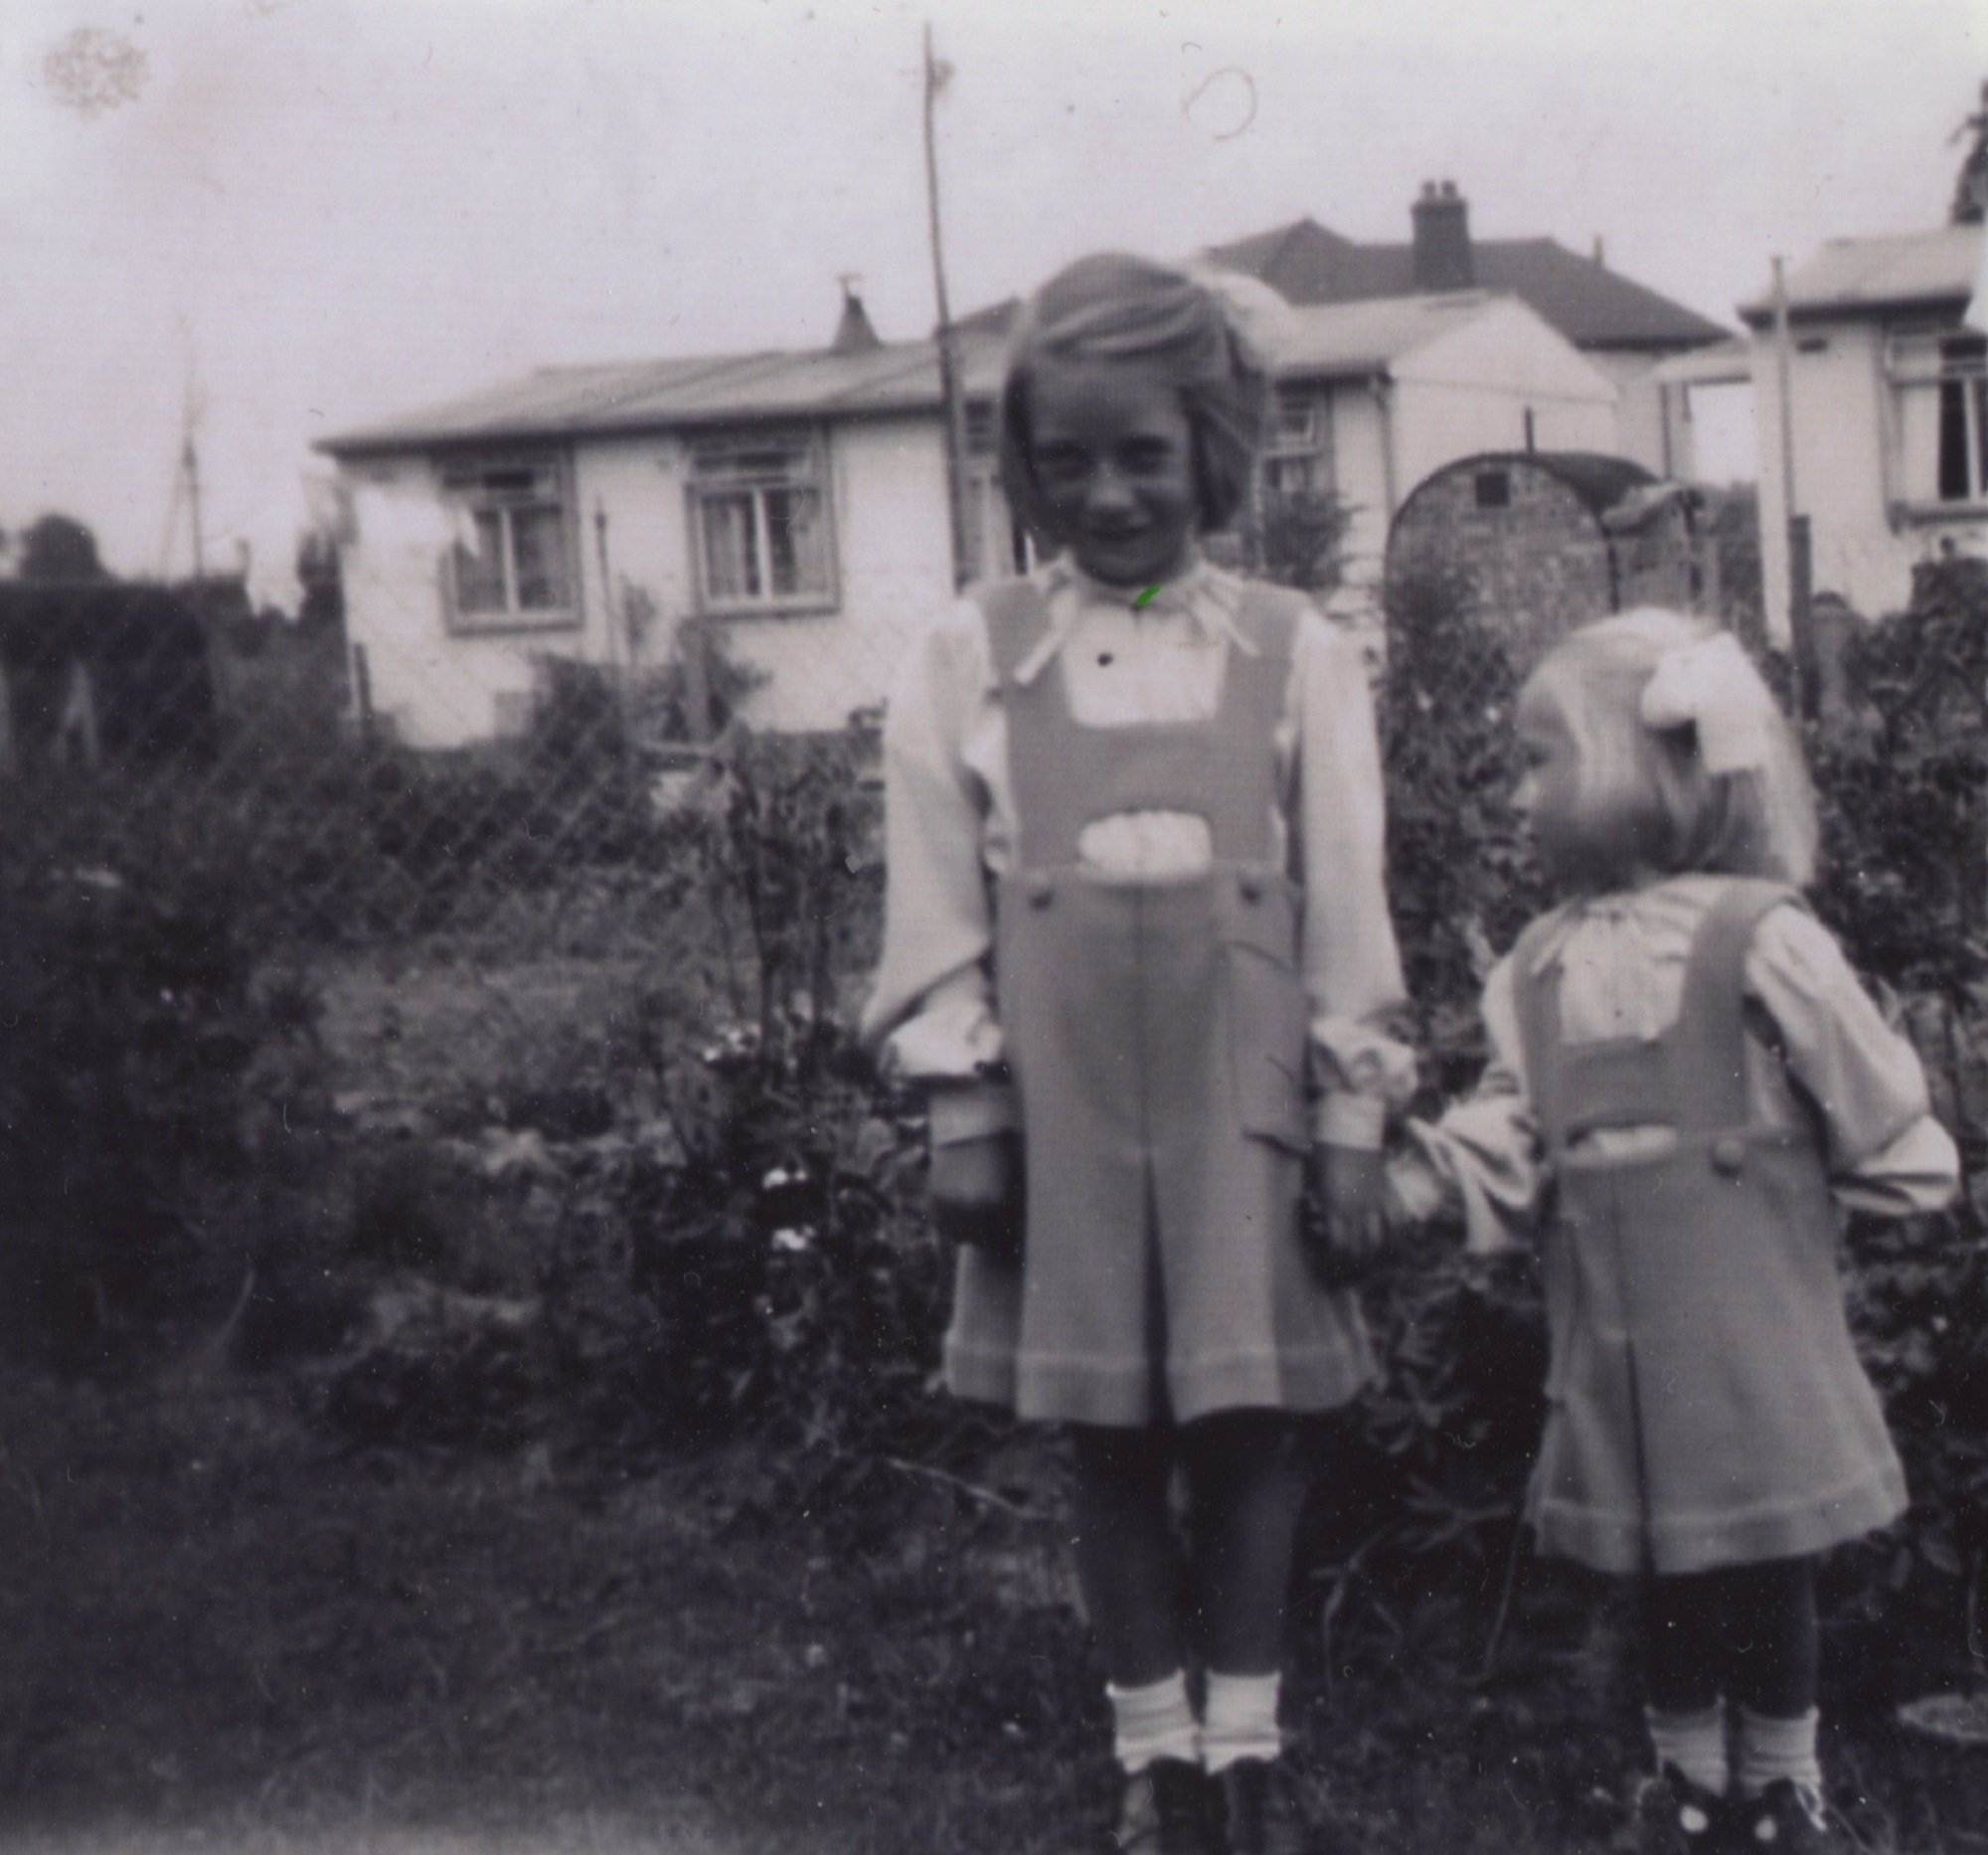 Elizabeth and Pauline in the back garden with nos 1 and 2 in the background. 6 Willow Lane, Wickford, Essex